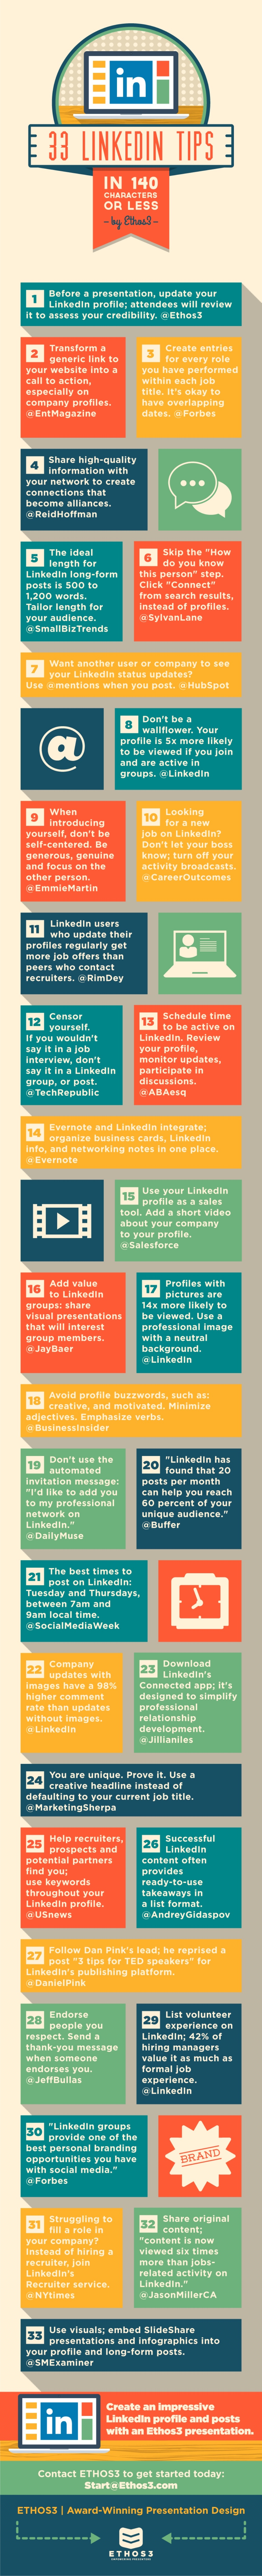 33-linkedin-tips-in-140-characters-or-less-1-1024